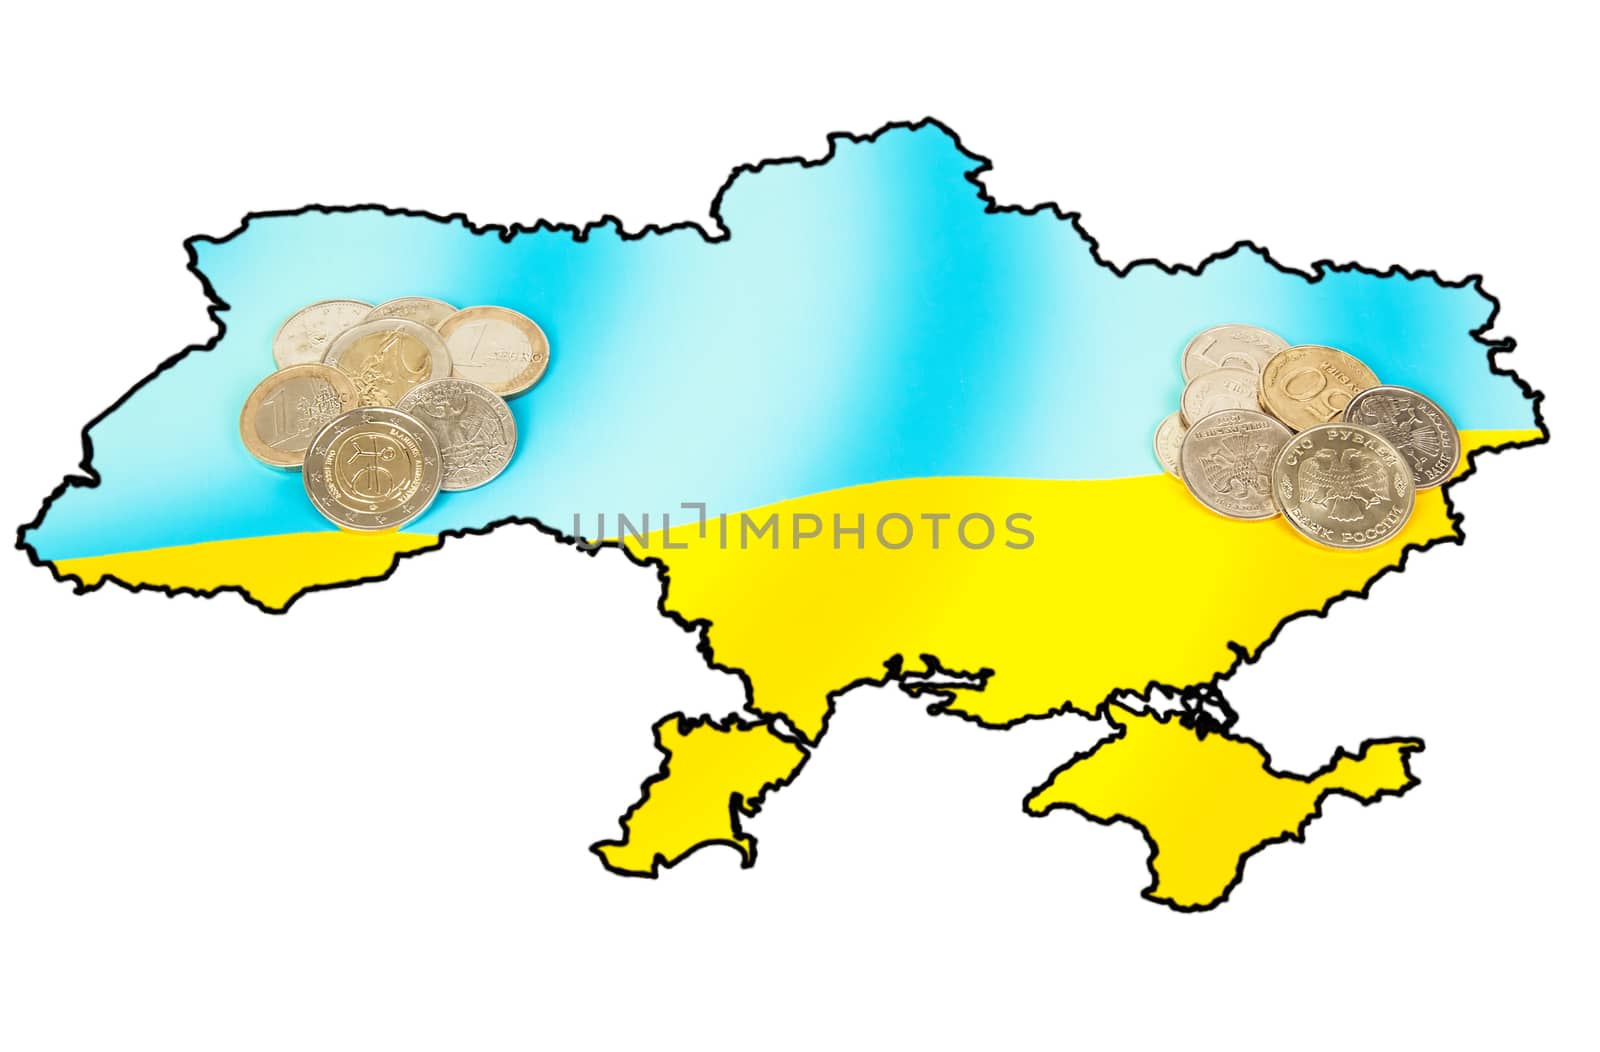 Different coins on ukrainian map concept by RawGroup